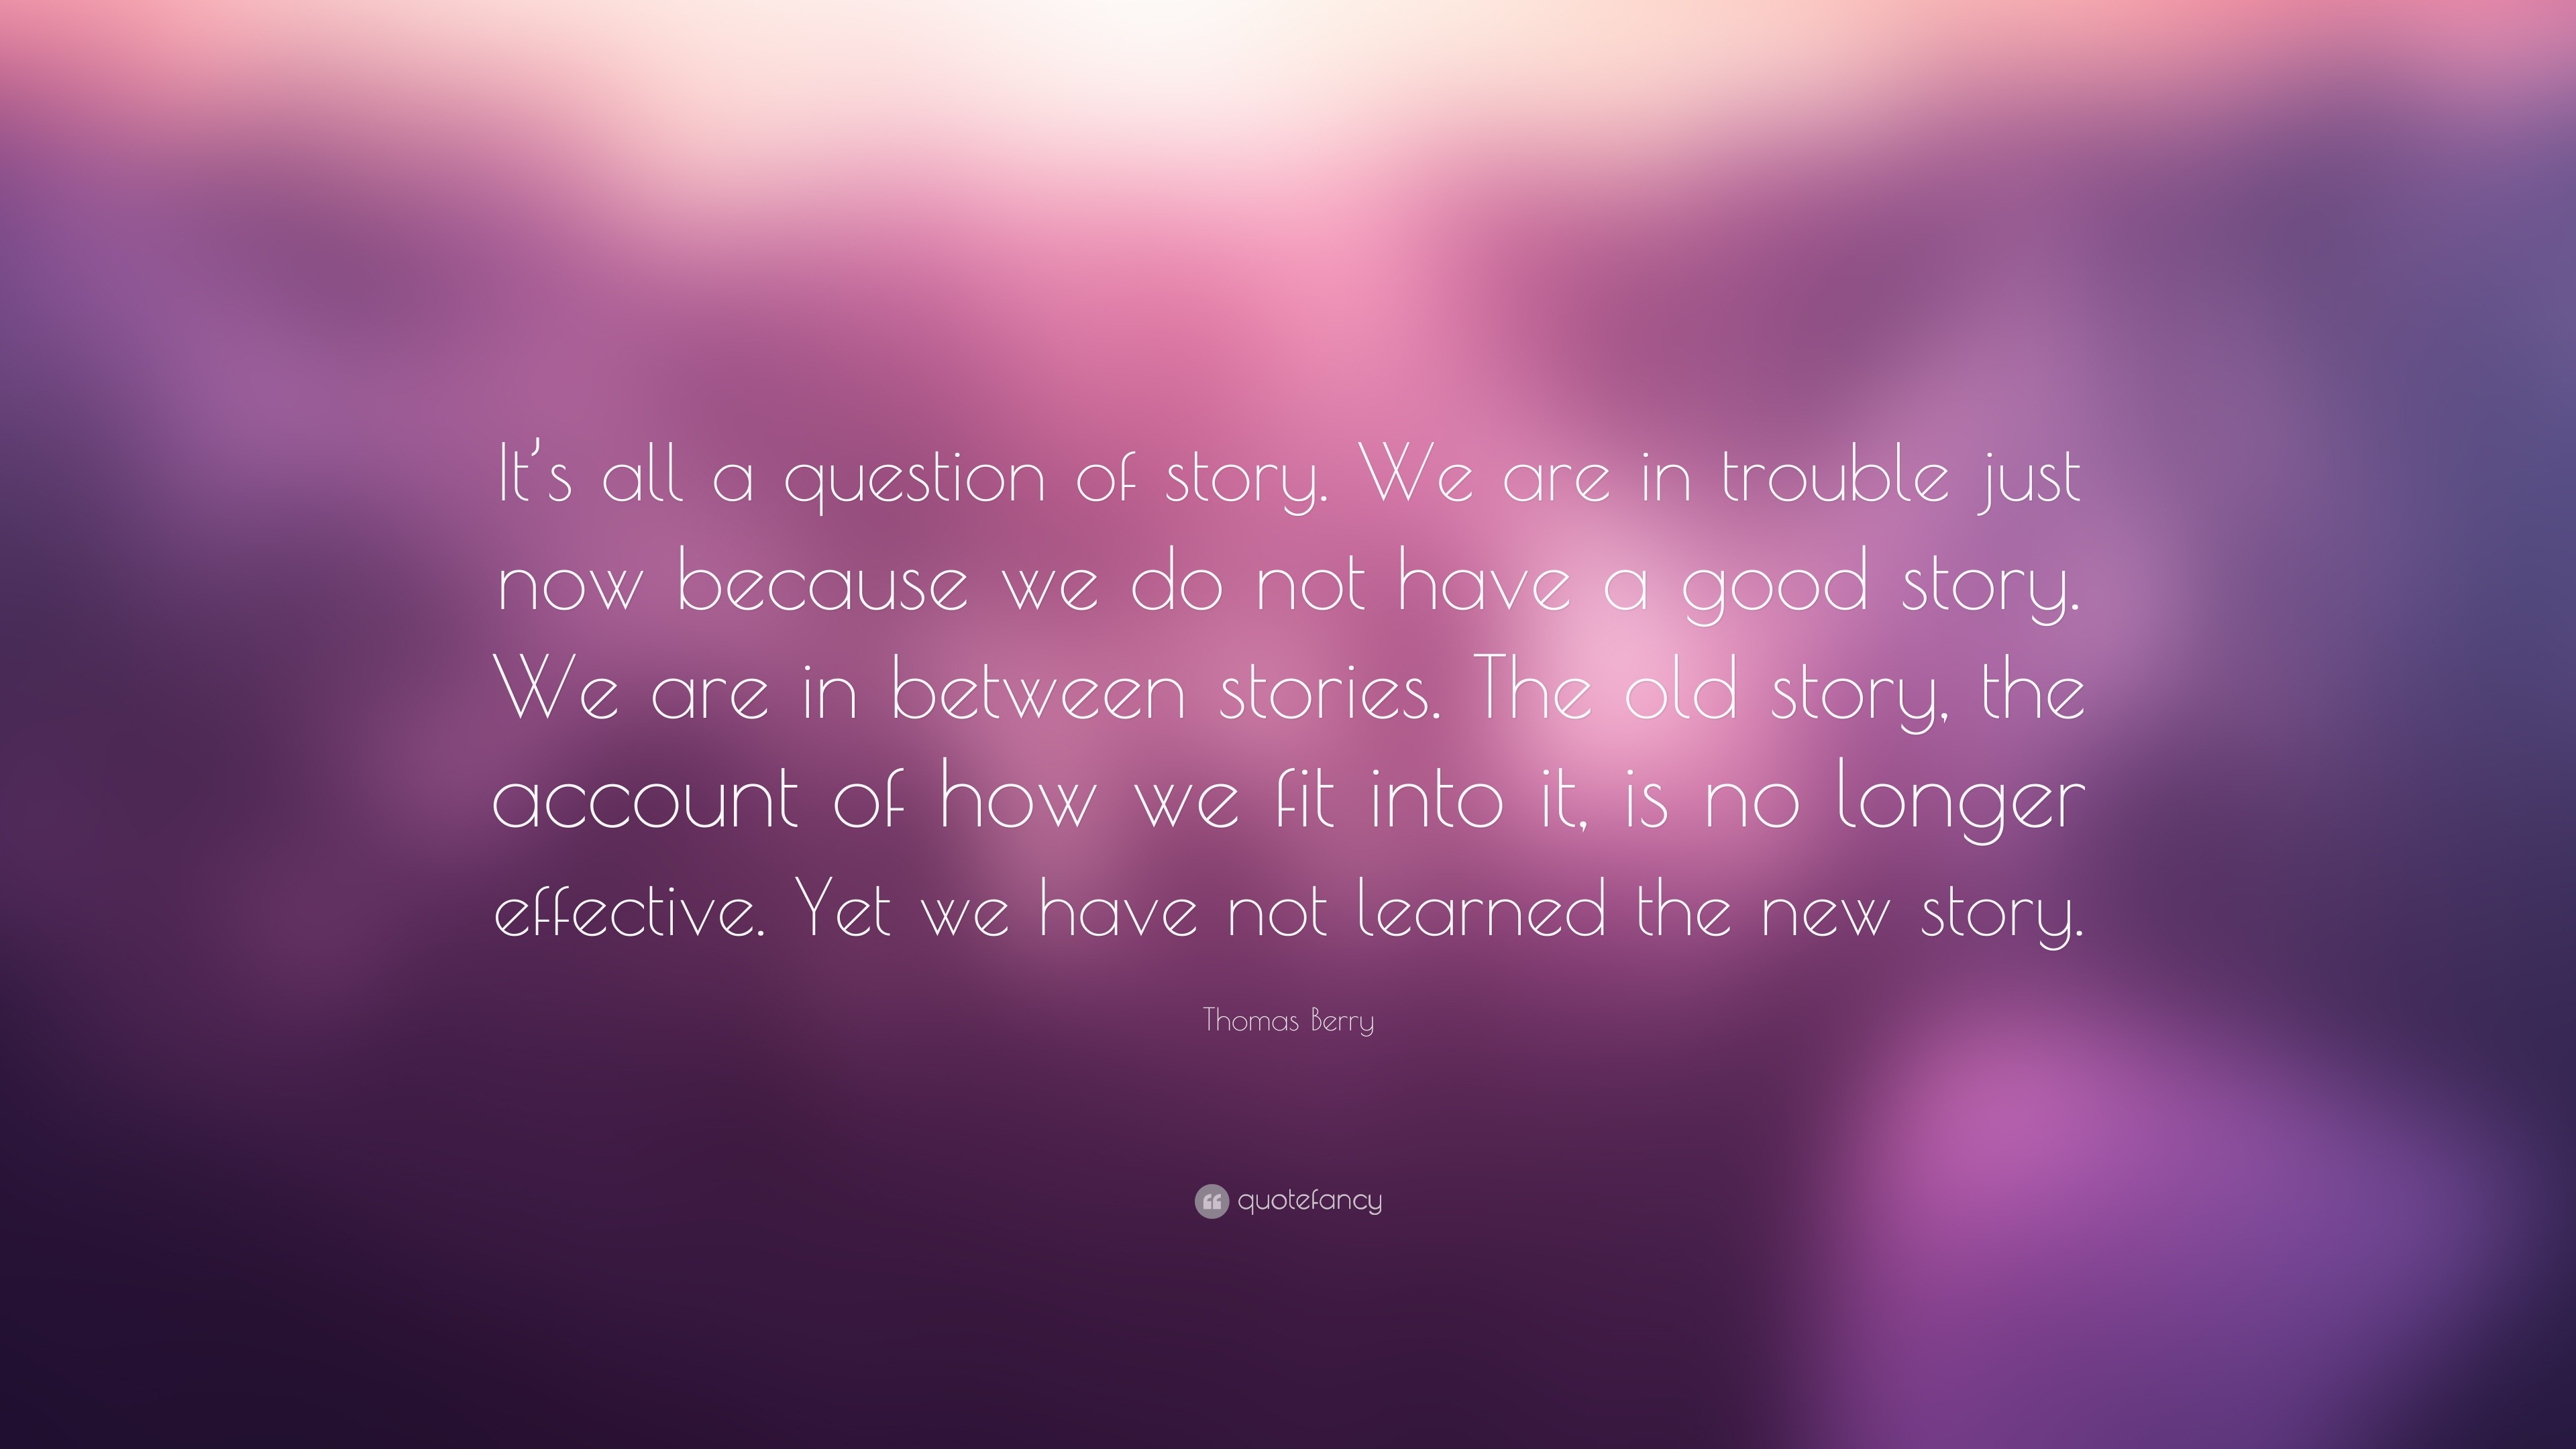 Thomas Berry Quote: “It’s all a question of story. We are in trouble ...